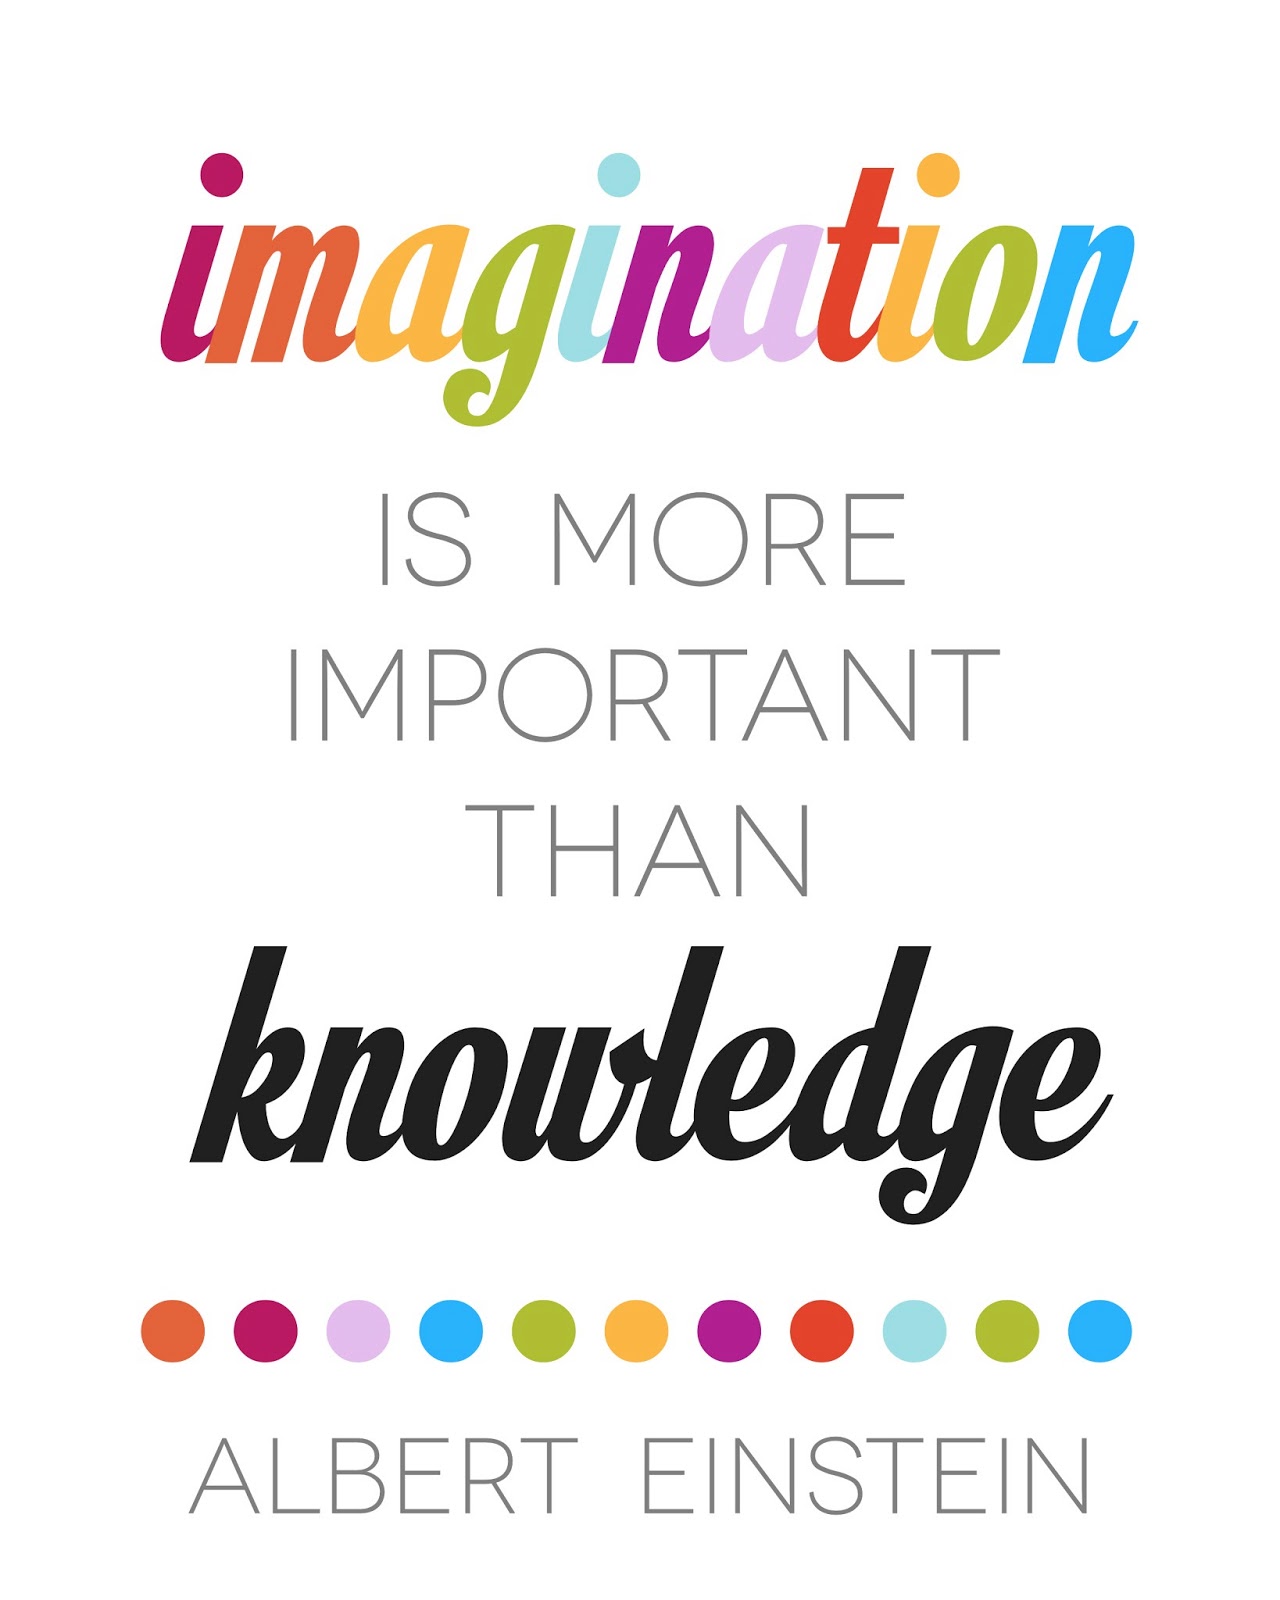 Imagination and knowledge essay